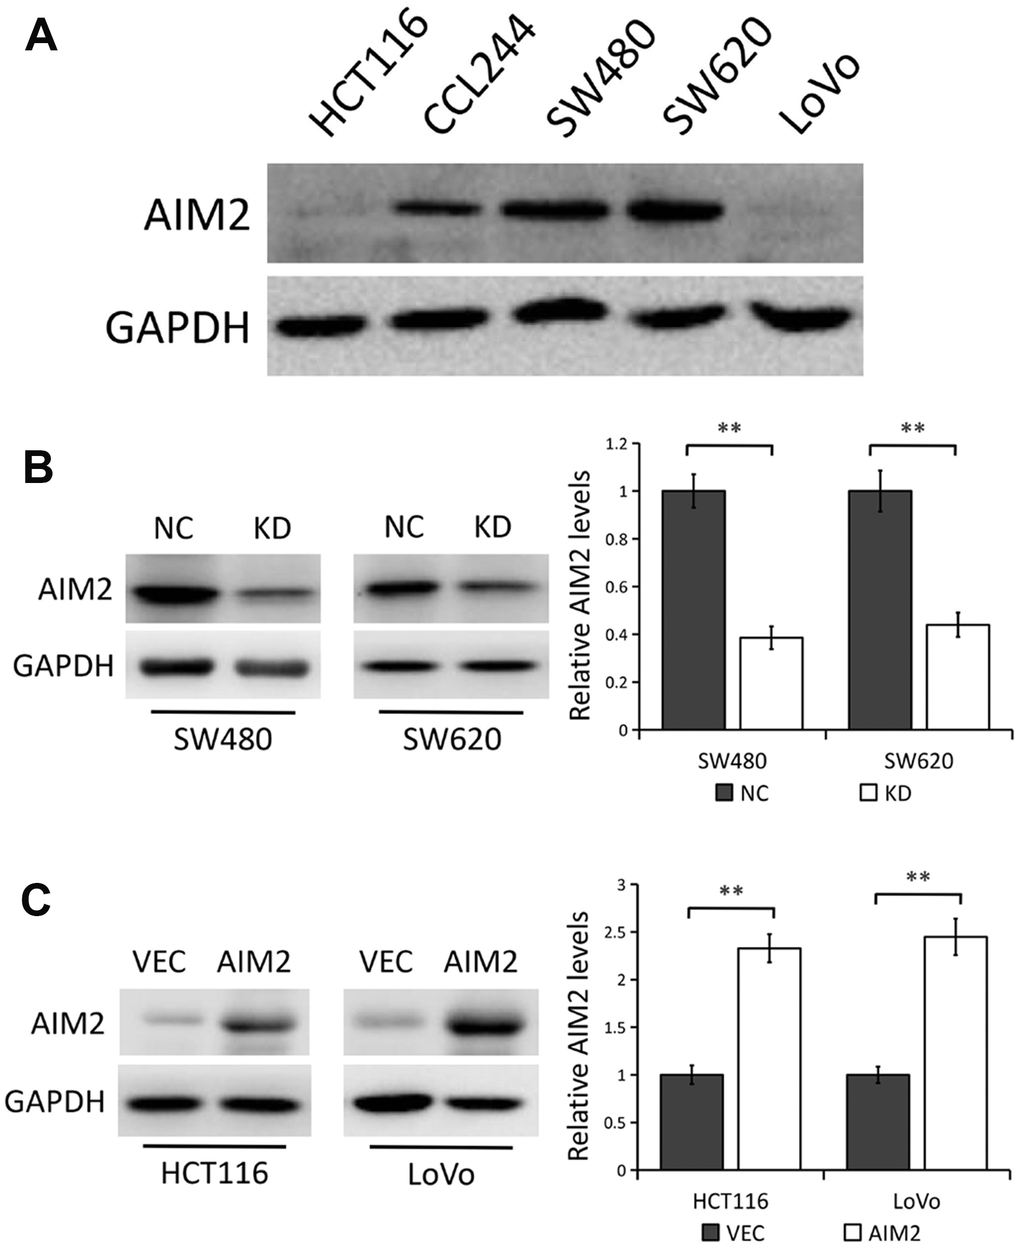 AIM2 protein expression in human CRC cell lines. (A) Western blots of AIM2 protein in five human CRC cell lines (HCT116, CCL244, SW480, SW620 and LoVo). GAPDH as a loading control. (B) Western blots of AIM2 protein in SW480 and SW620 cells stably transfected with control-shRNA (NC) or shRNA against AIM2 (KD). GAPDH as a loading control. Each experiment was performed at least triplicate and the bands were quantified and presented as the mean±SEM. (C) Western blots of AIM2 protein in HCT116 and LoVo cells stably transfected with empty vector (VEC) or plasmid encoding human AIM2 (AIM2). GAPDH as a loading control. Each experiment was performed at least triplicate and the bands were quantified and presented as the mean±SEM. **P